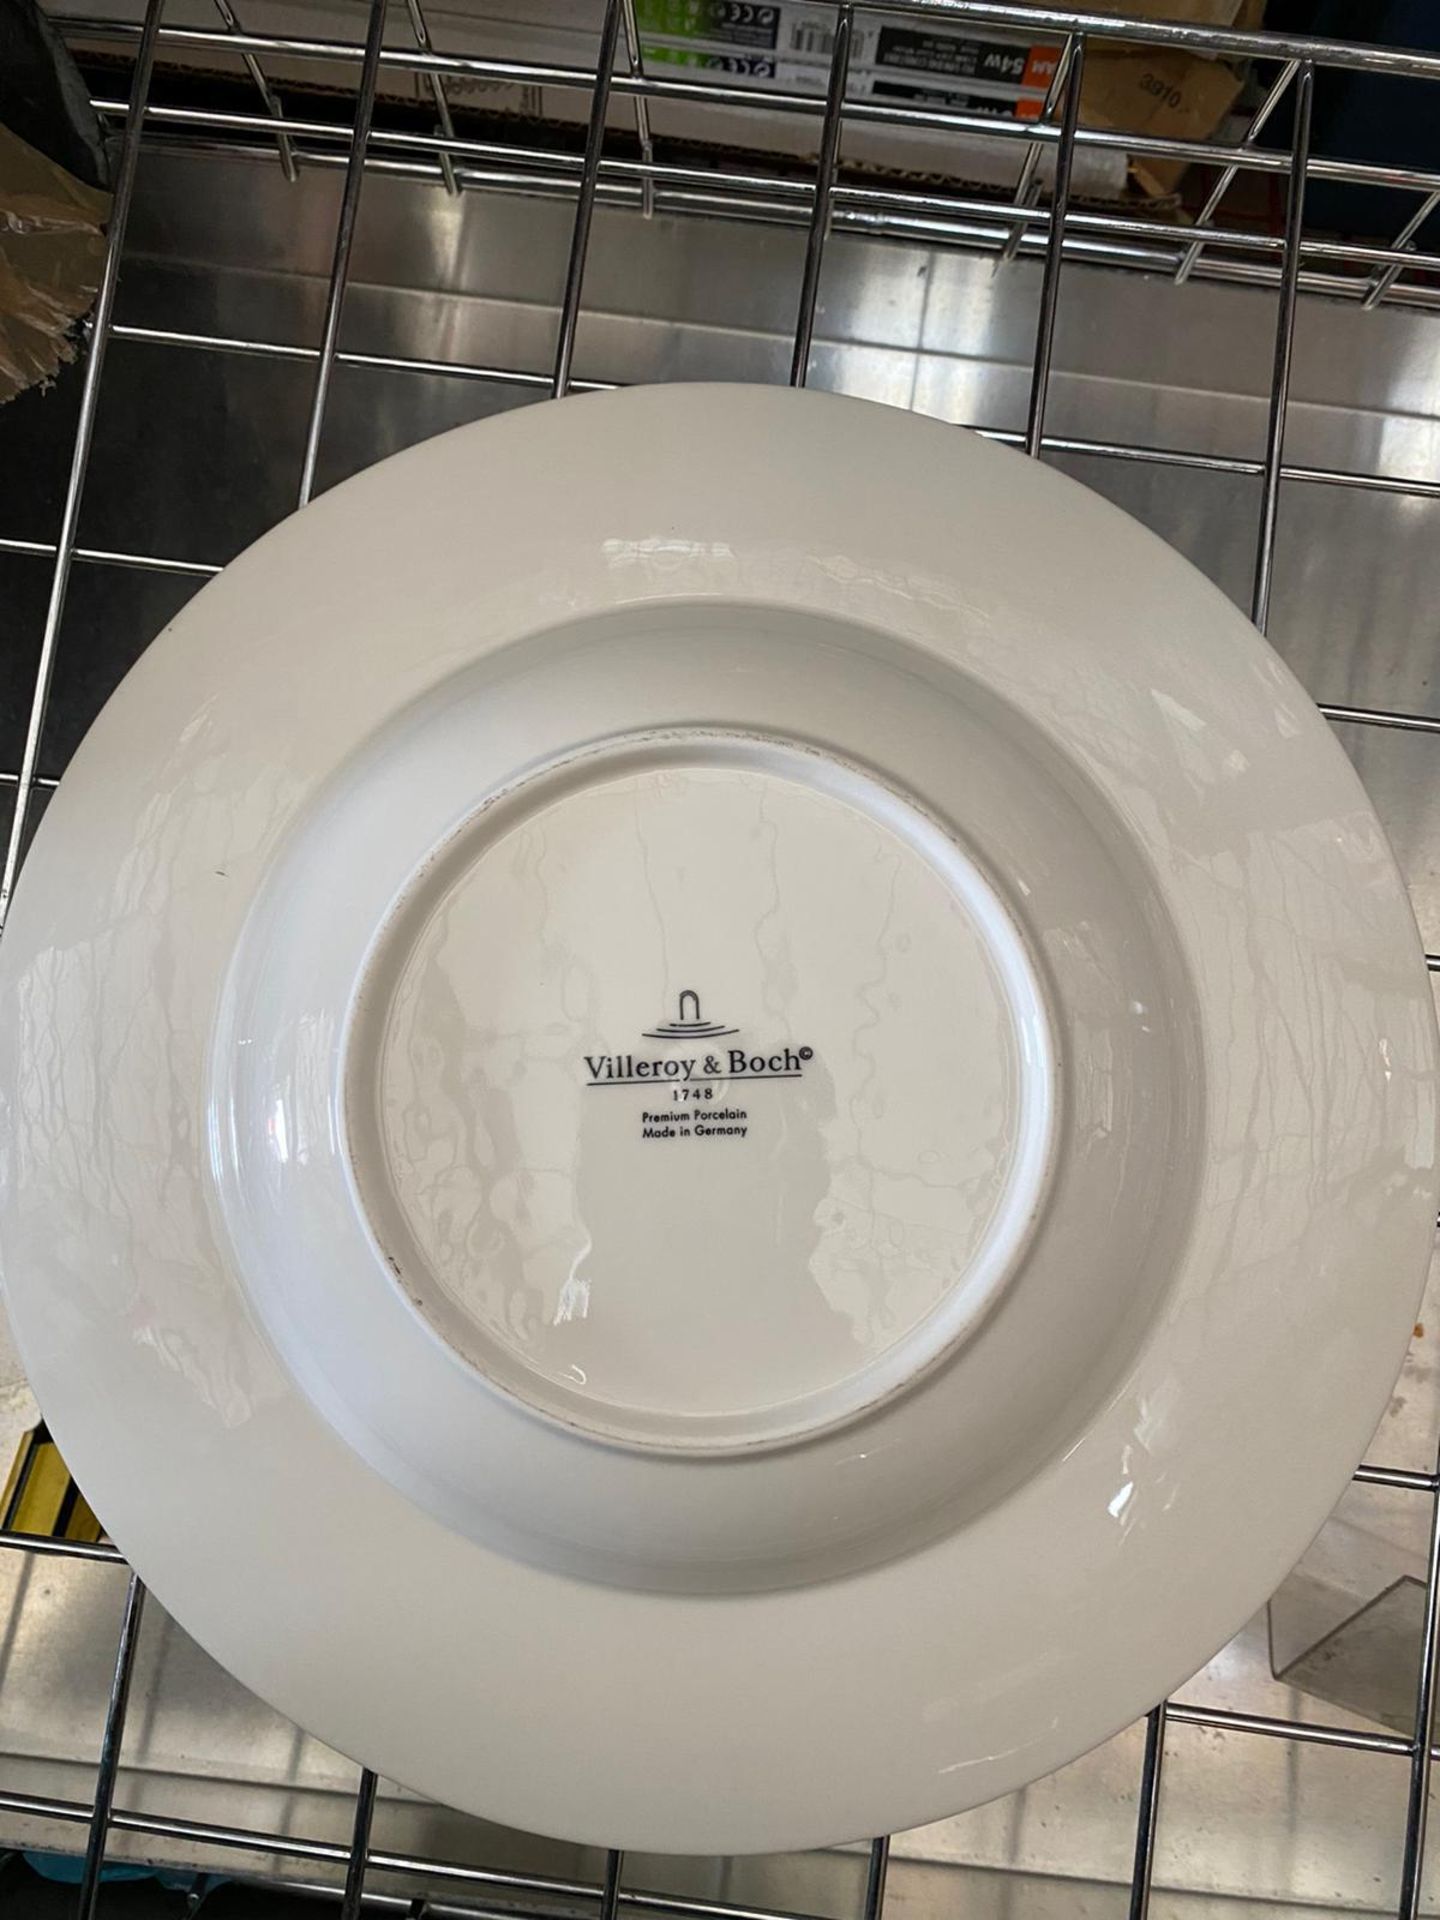 6 x Villeroy & Boch Royal Dinner Plate - 290mm (29cm) - Ref: 1044122620 - New and Boxed - - Image 3 of 5